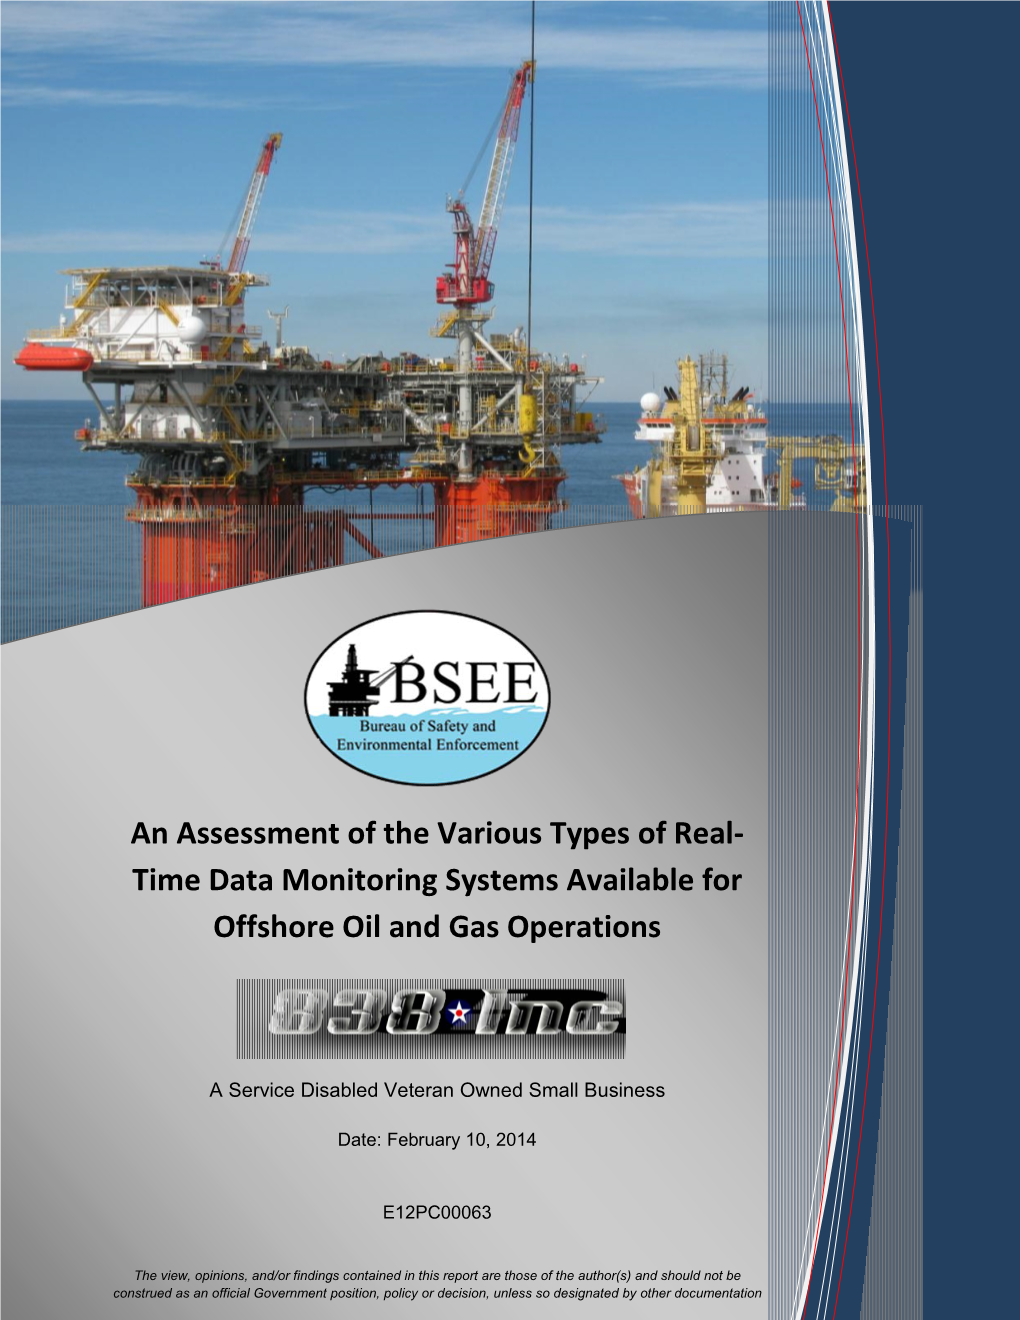 Time Data Monitoring Systems Available for Offshore Oil and Gas Operations